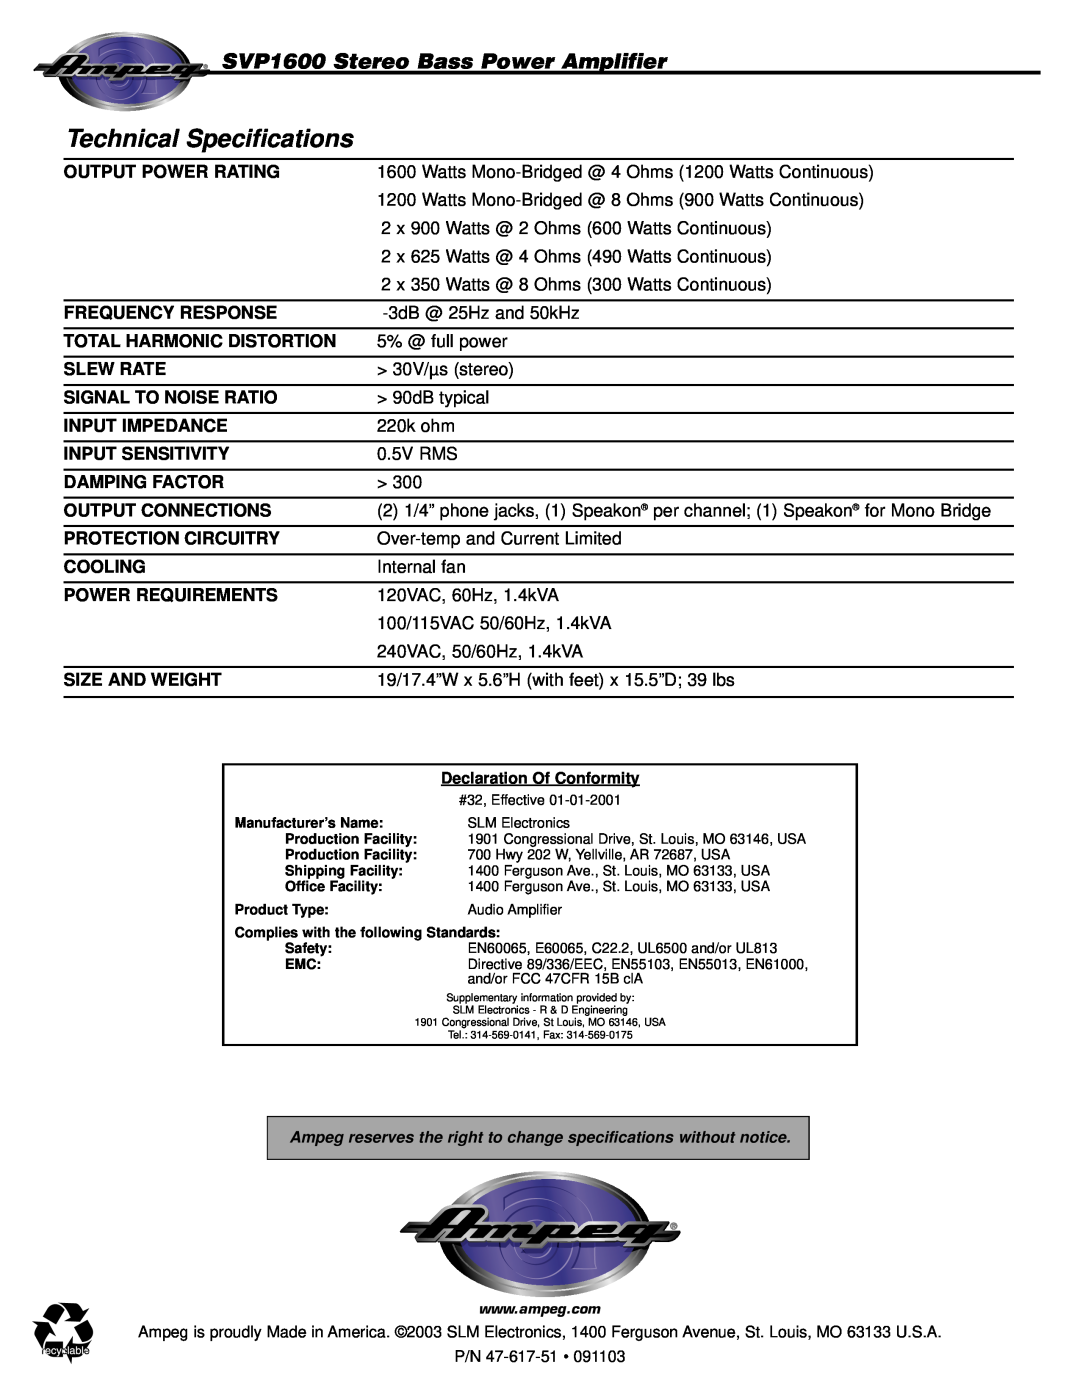 Ampeg manual Technical Specifications, SVP1600 Stereo Bass Power Amplifier 